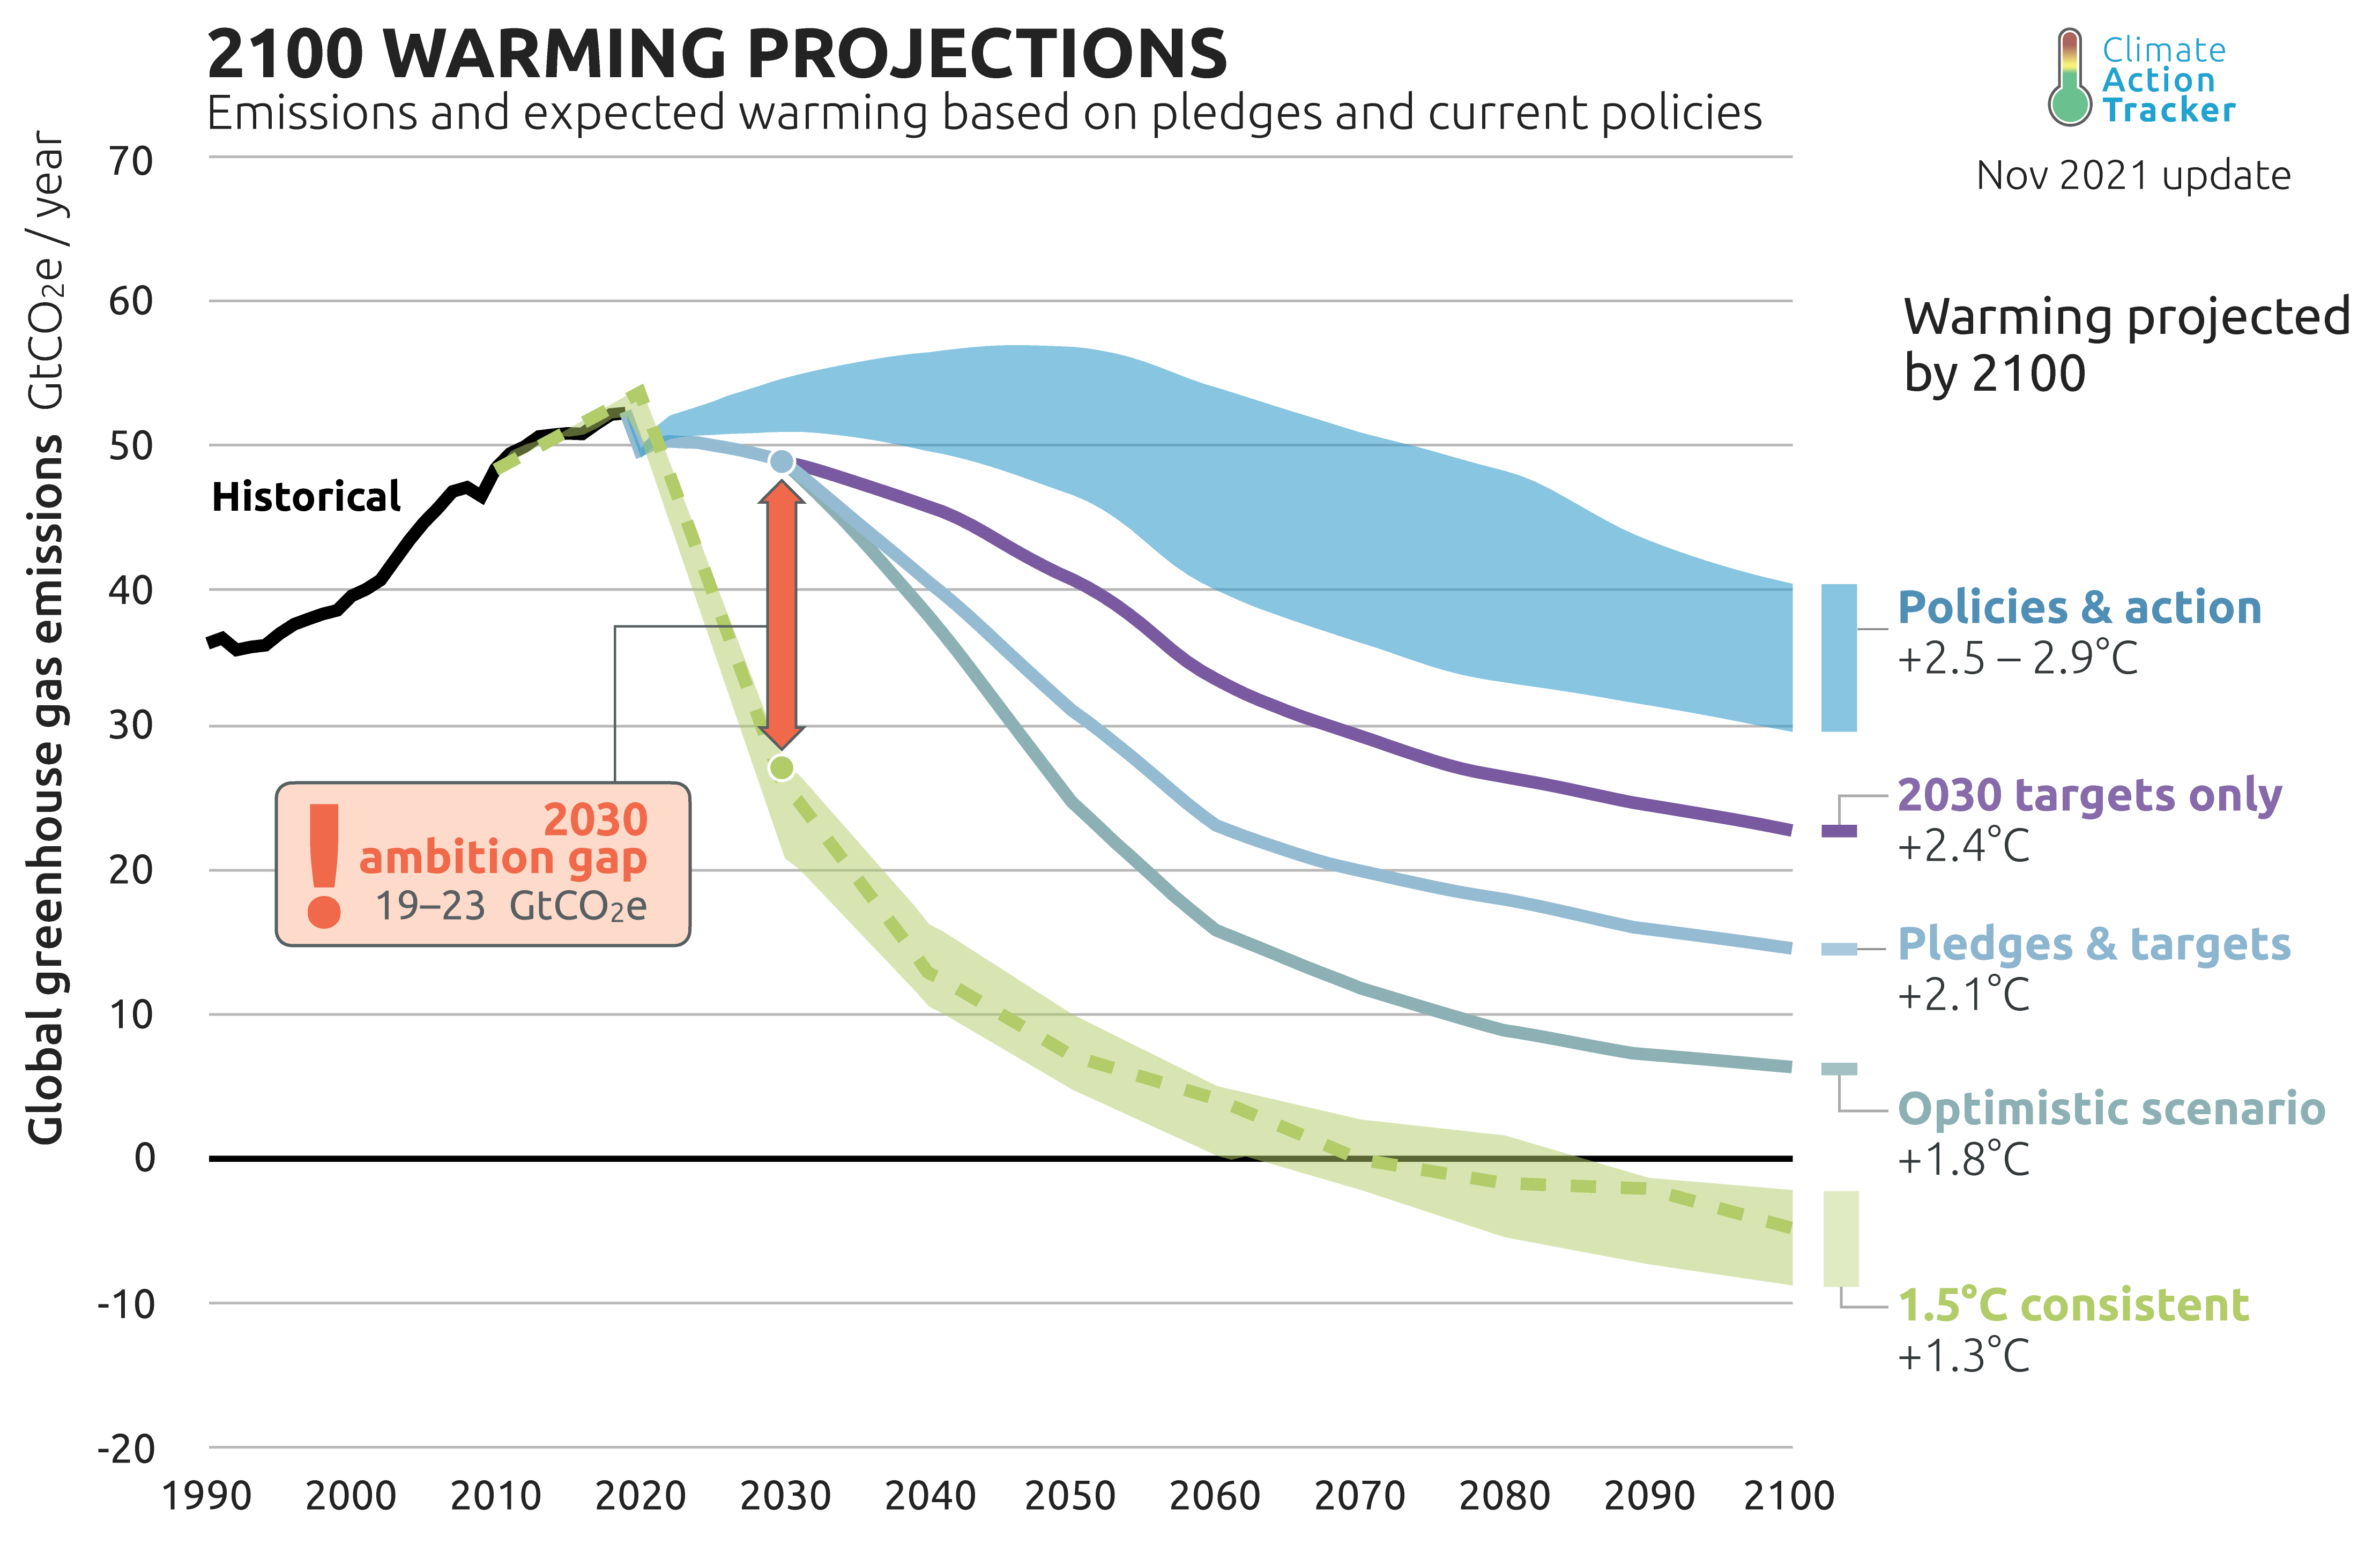 A graph from Climate Action Tracker entitled '2100 Warming Projections: Emissions and expected warming based on pledges and current policies.' It shows warming projected by the year 2100 and this graph is the November 2021 update.